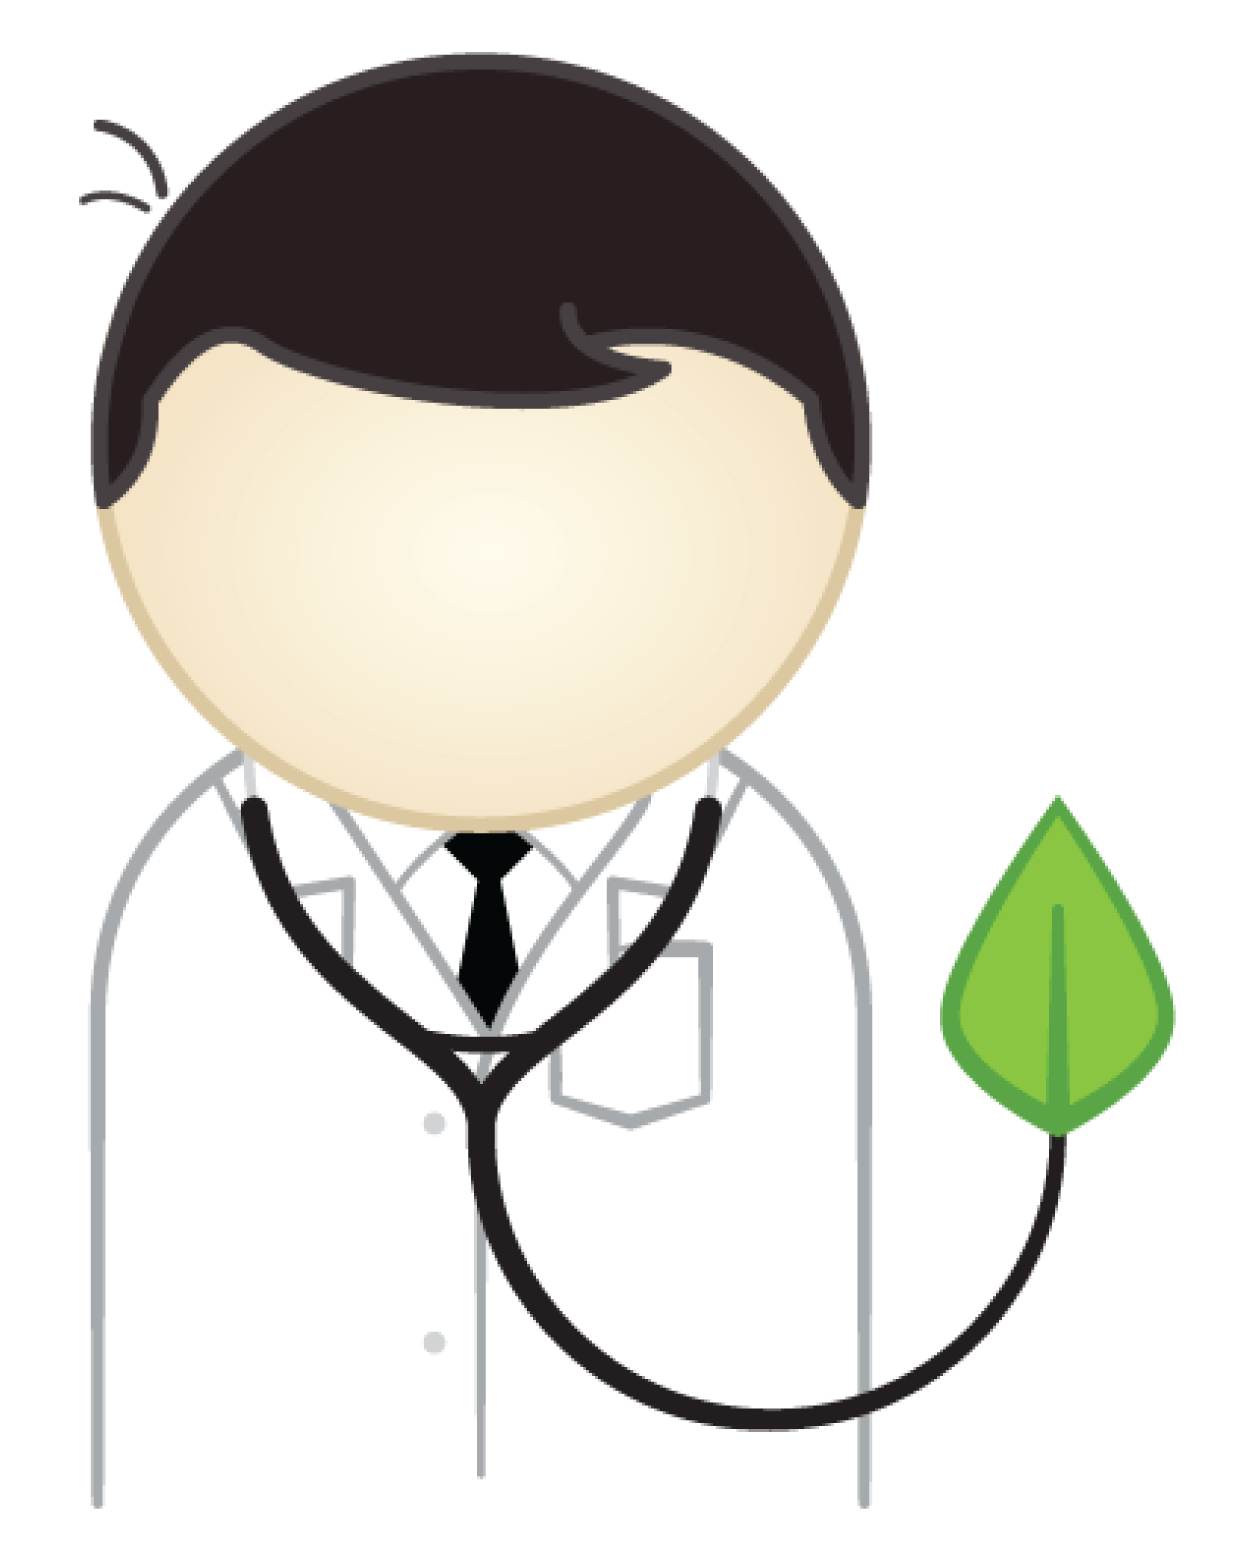 psychology clipart doctor